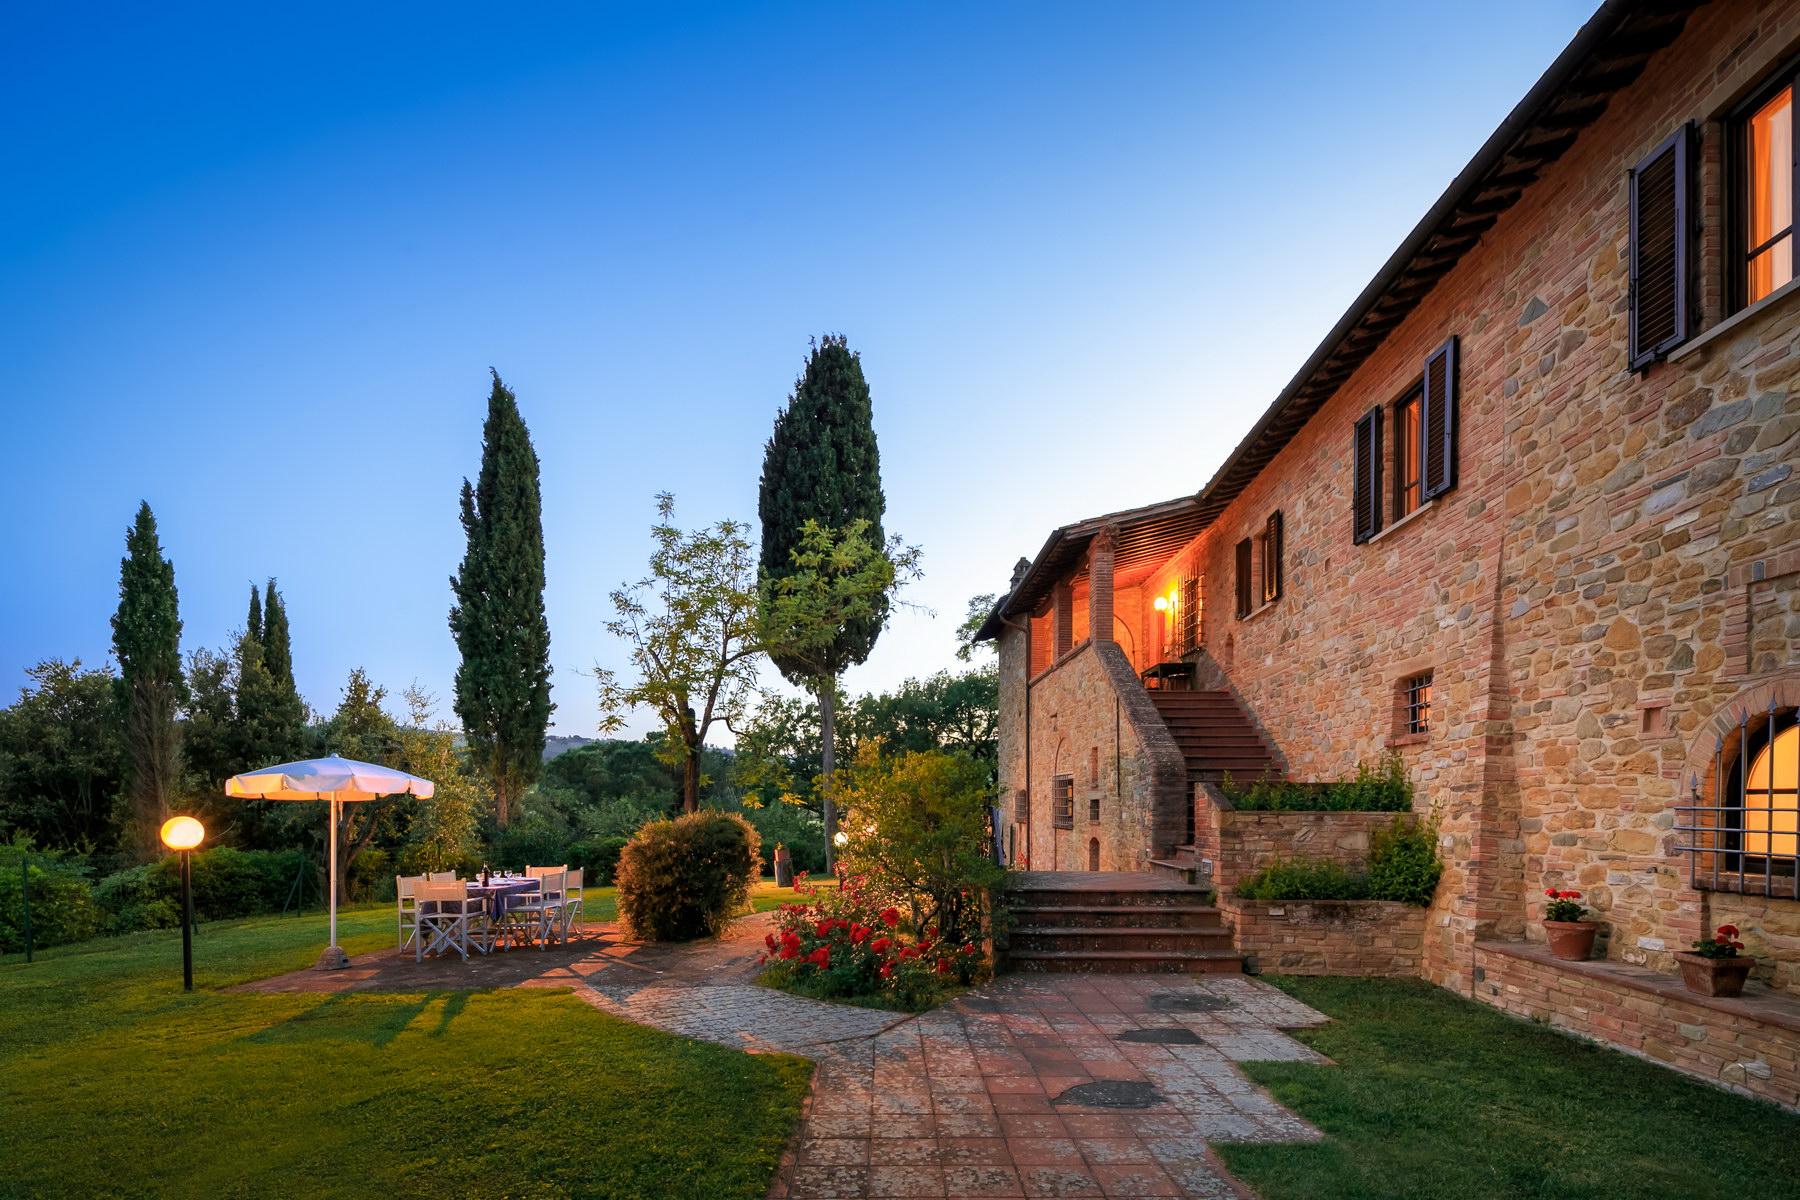 Wonderful countryhouse in the tuscan countryside - 1